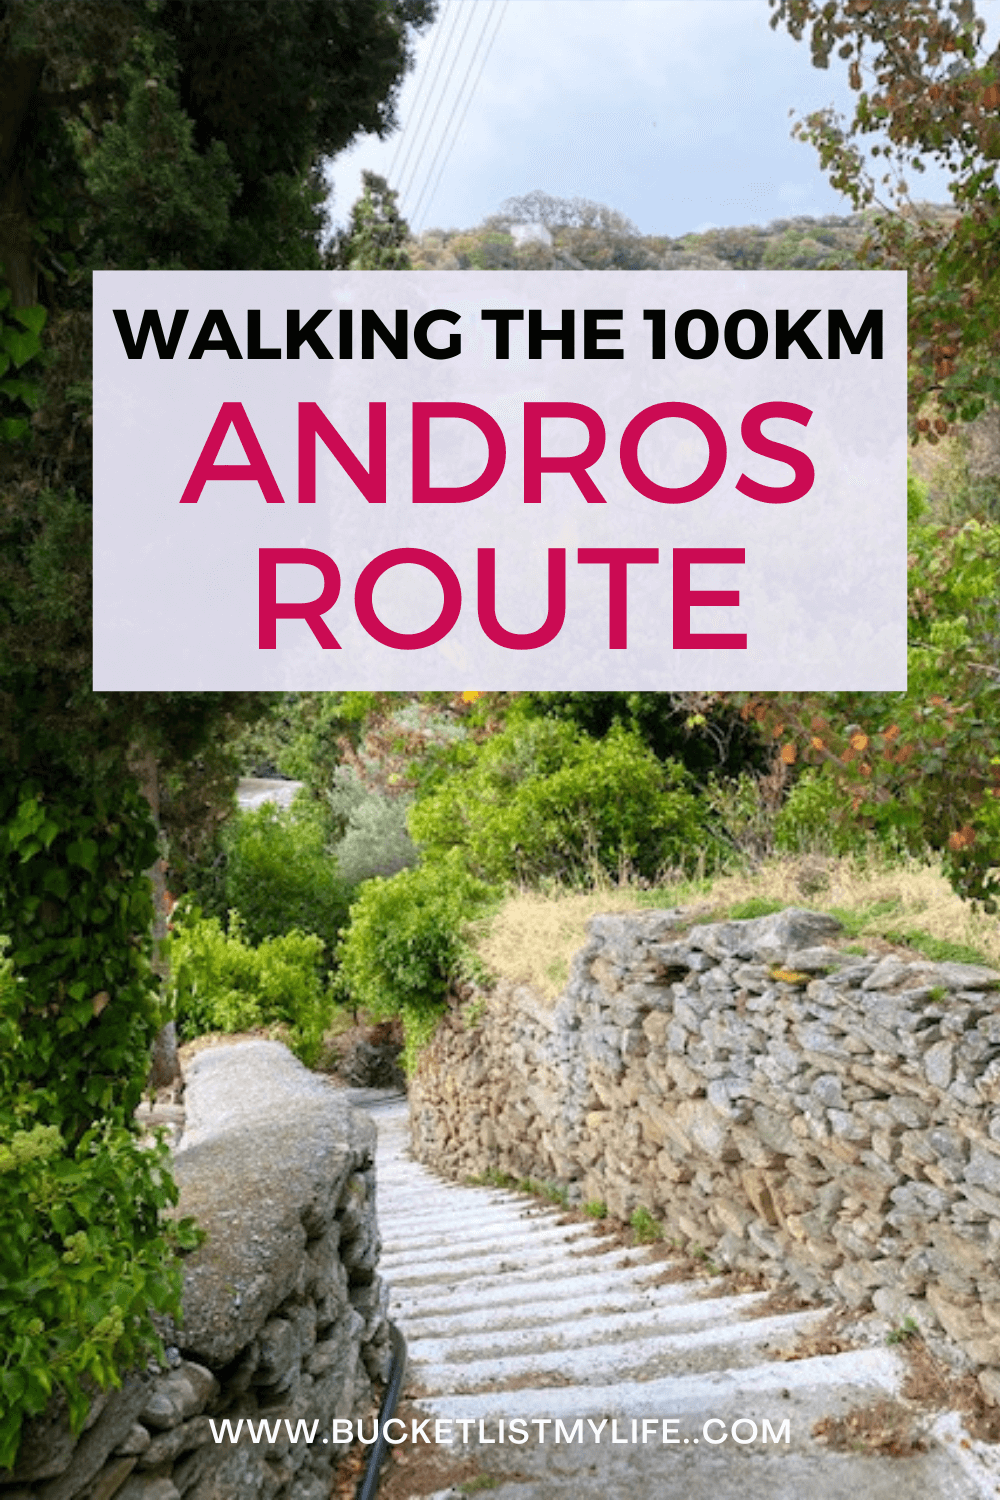 Hiking in Andros: A Paradise for Walkers